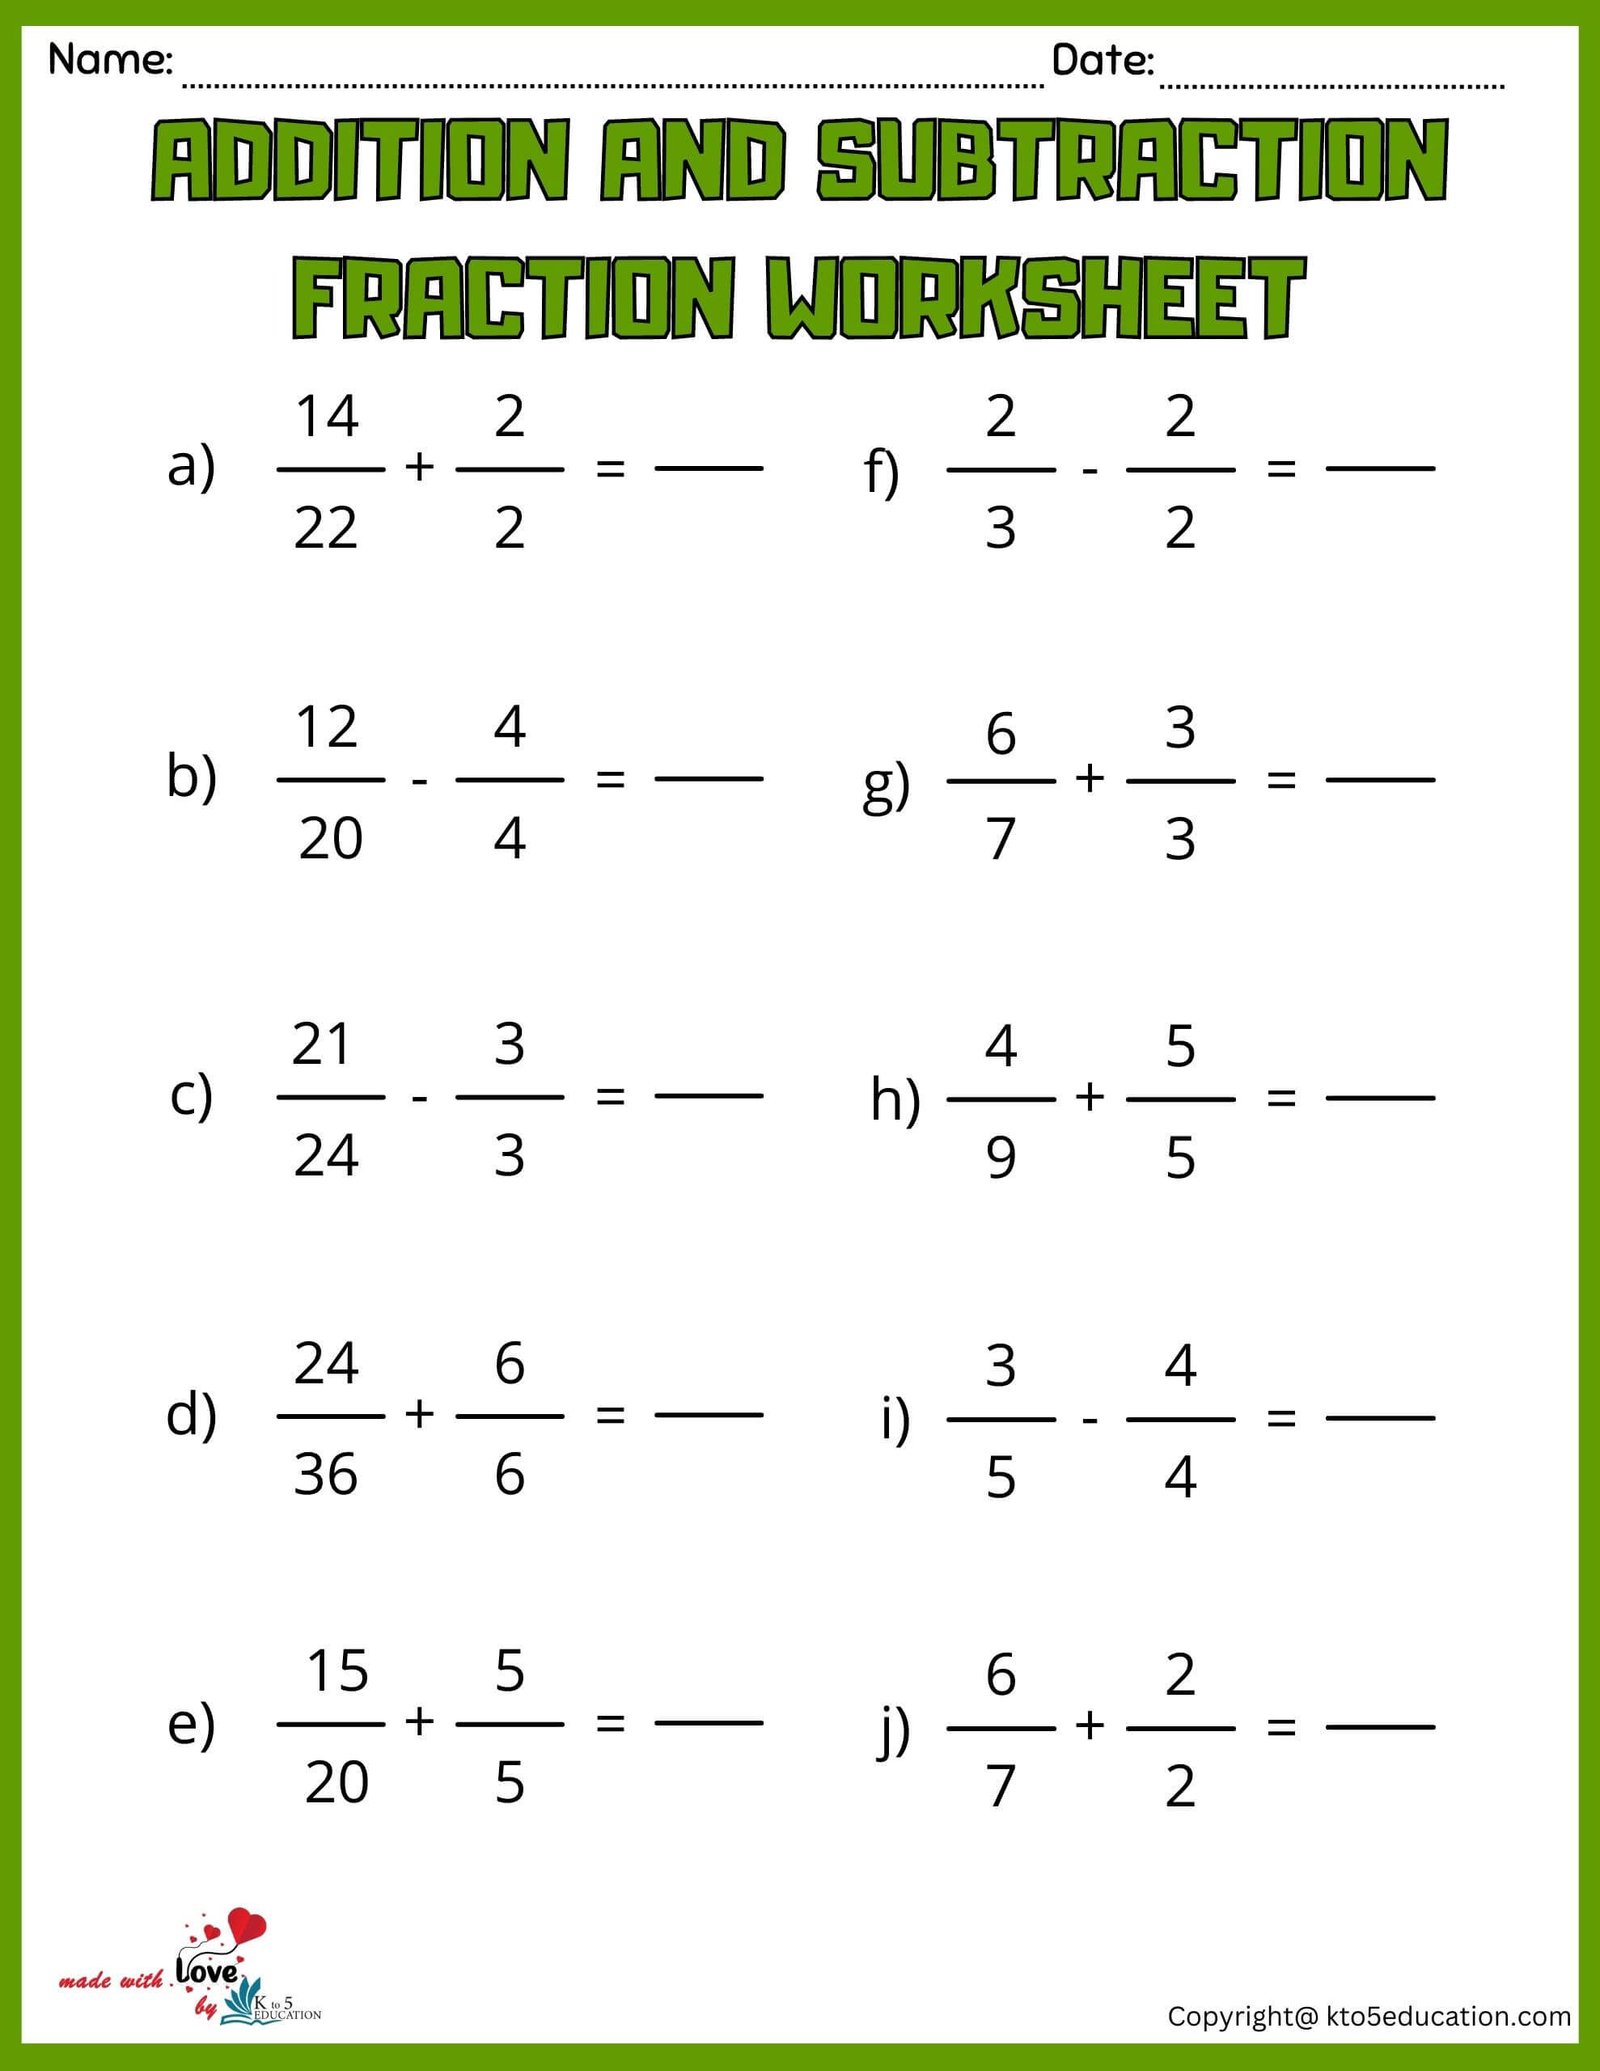 Free Addition And Subtraction Fraction Worksheet For Kids